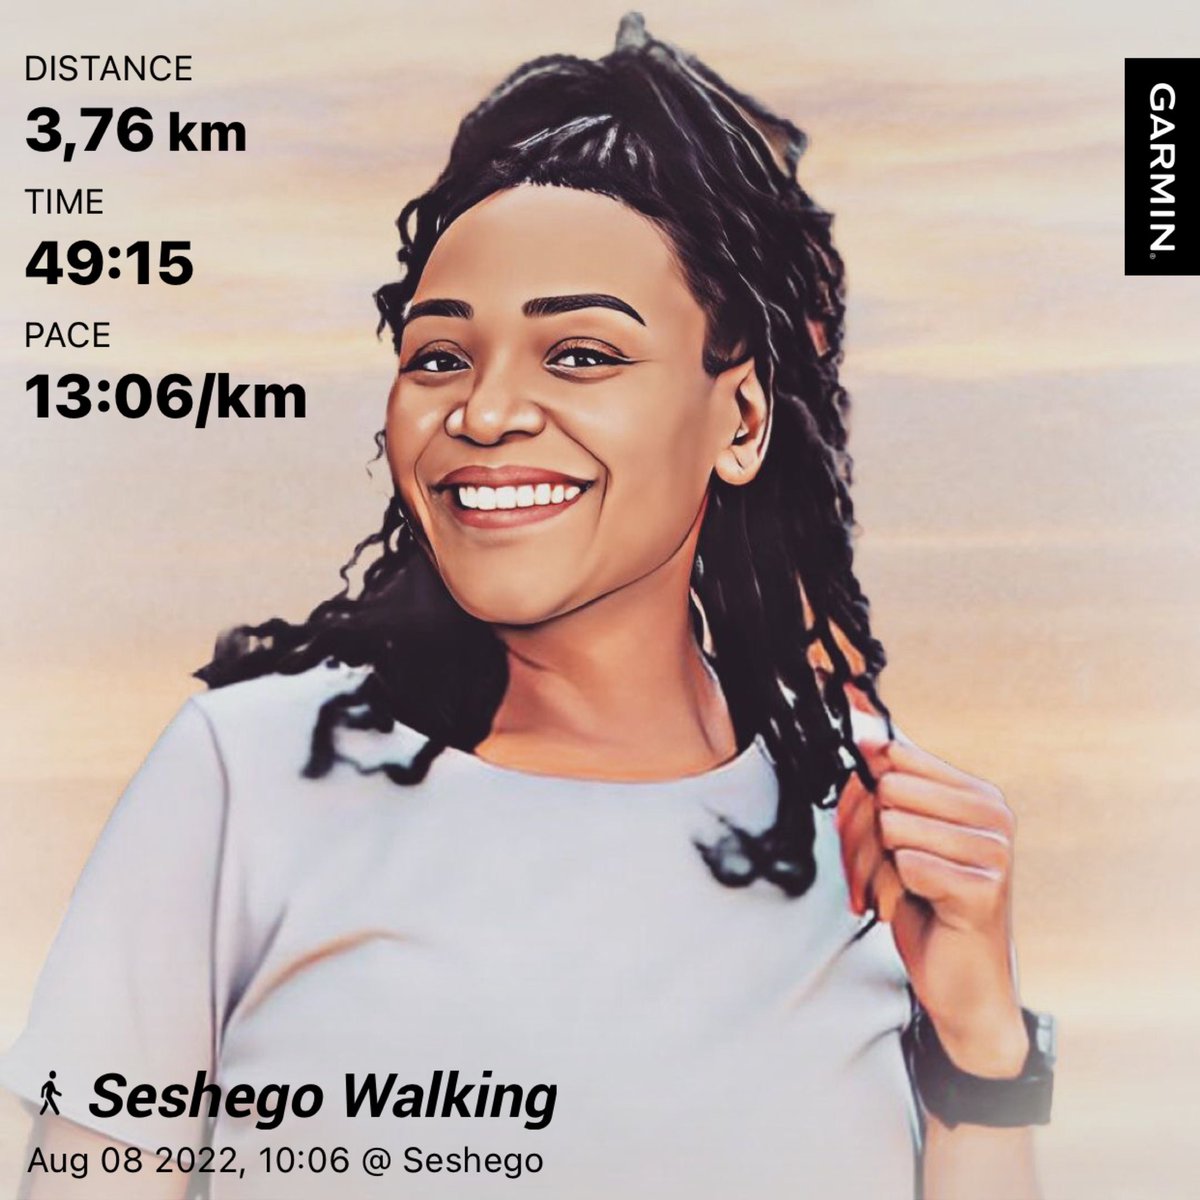 #NeverSkipMonday gym class 💞 and a walk to clear the mind 🚶🏾‍♀️ 

#RunningWithTumiSole 
#TrapnLos
#FetchYourBody2022 
#IPaintedMyWalk
#IChoose2BActive